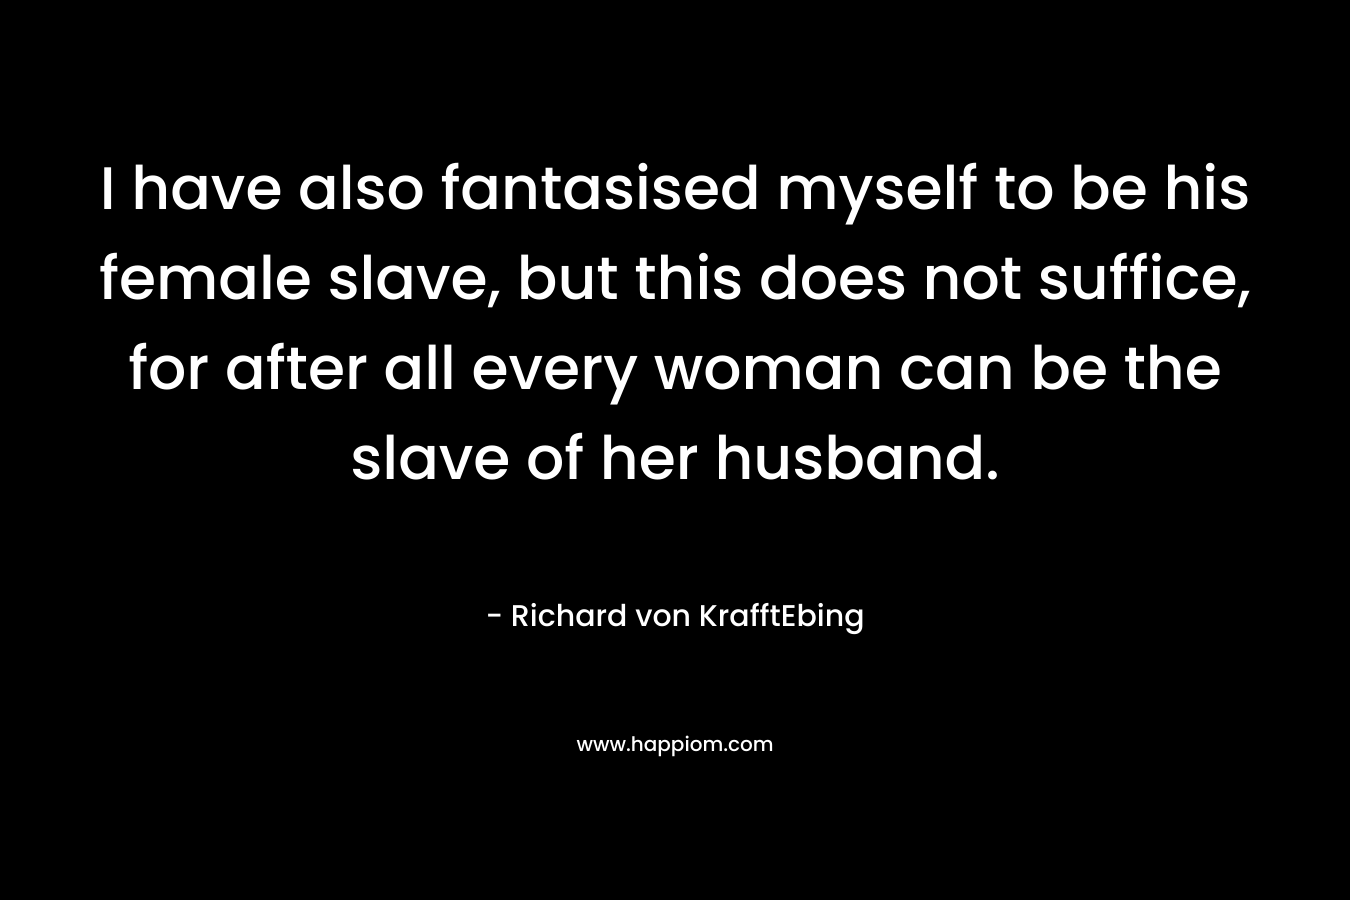 I have also fantasised myself to be his female slave, but this does not suffice, for after all every woman can be the slave of her husband. – Richard von KrafftEbing